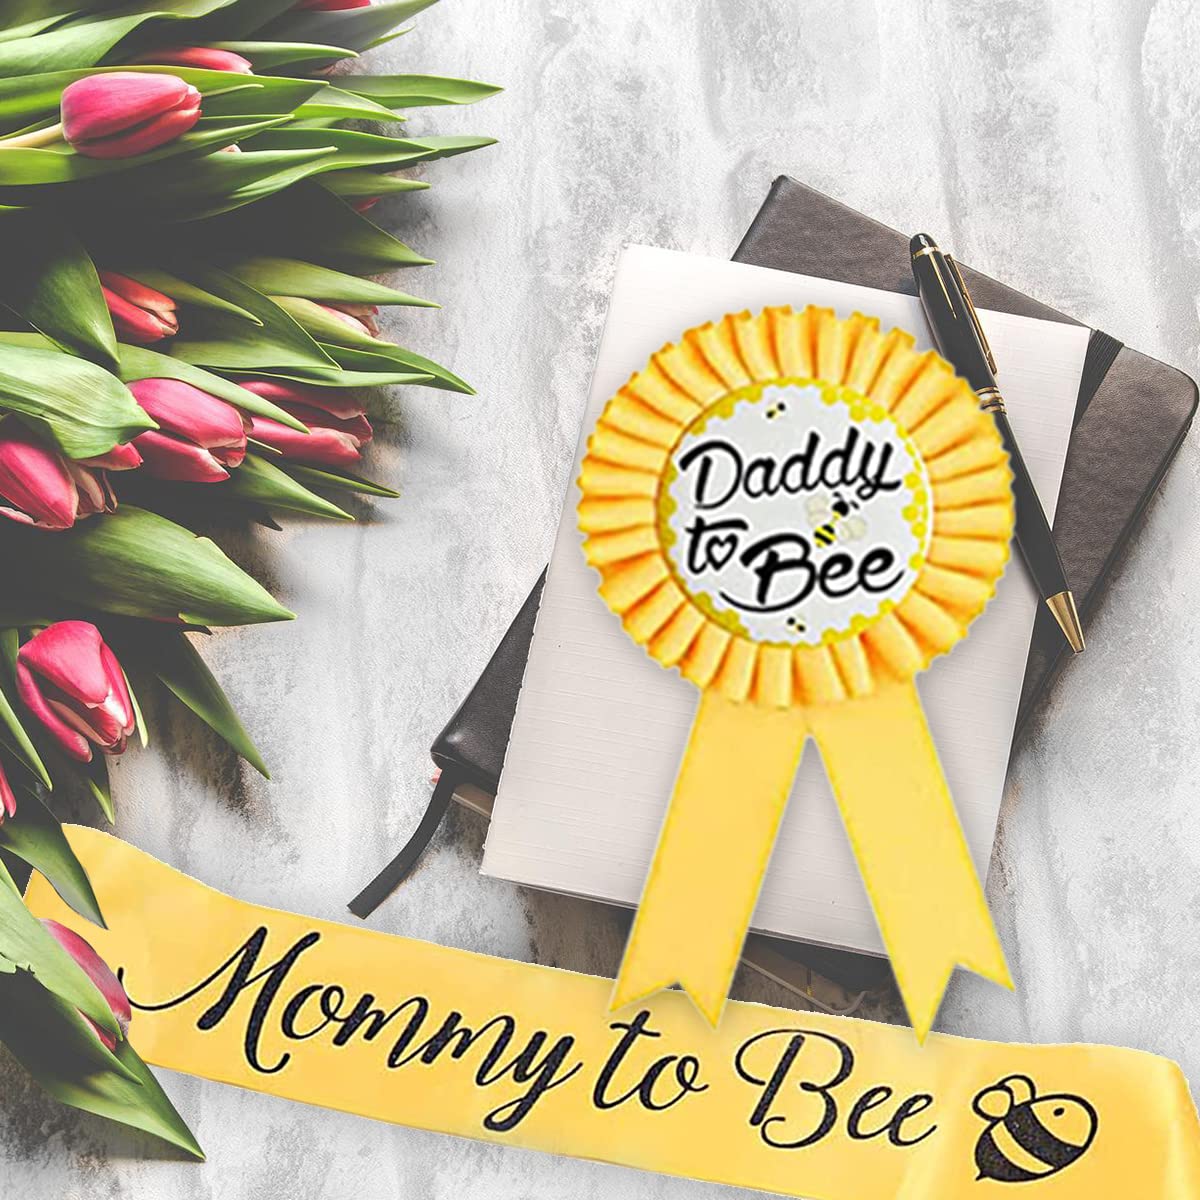 2 Packs Yellow Mommy to Bee Sash and Daddy to Bee Pin Tinplate Badge, Baby Shower Party Decoration with Cute Bee Pattern, Baby Welcome Party Gifts